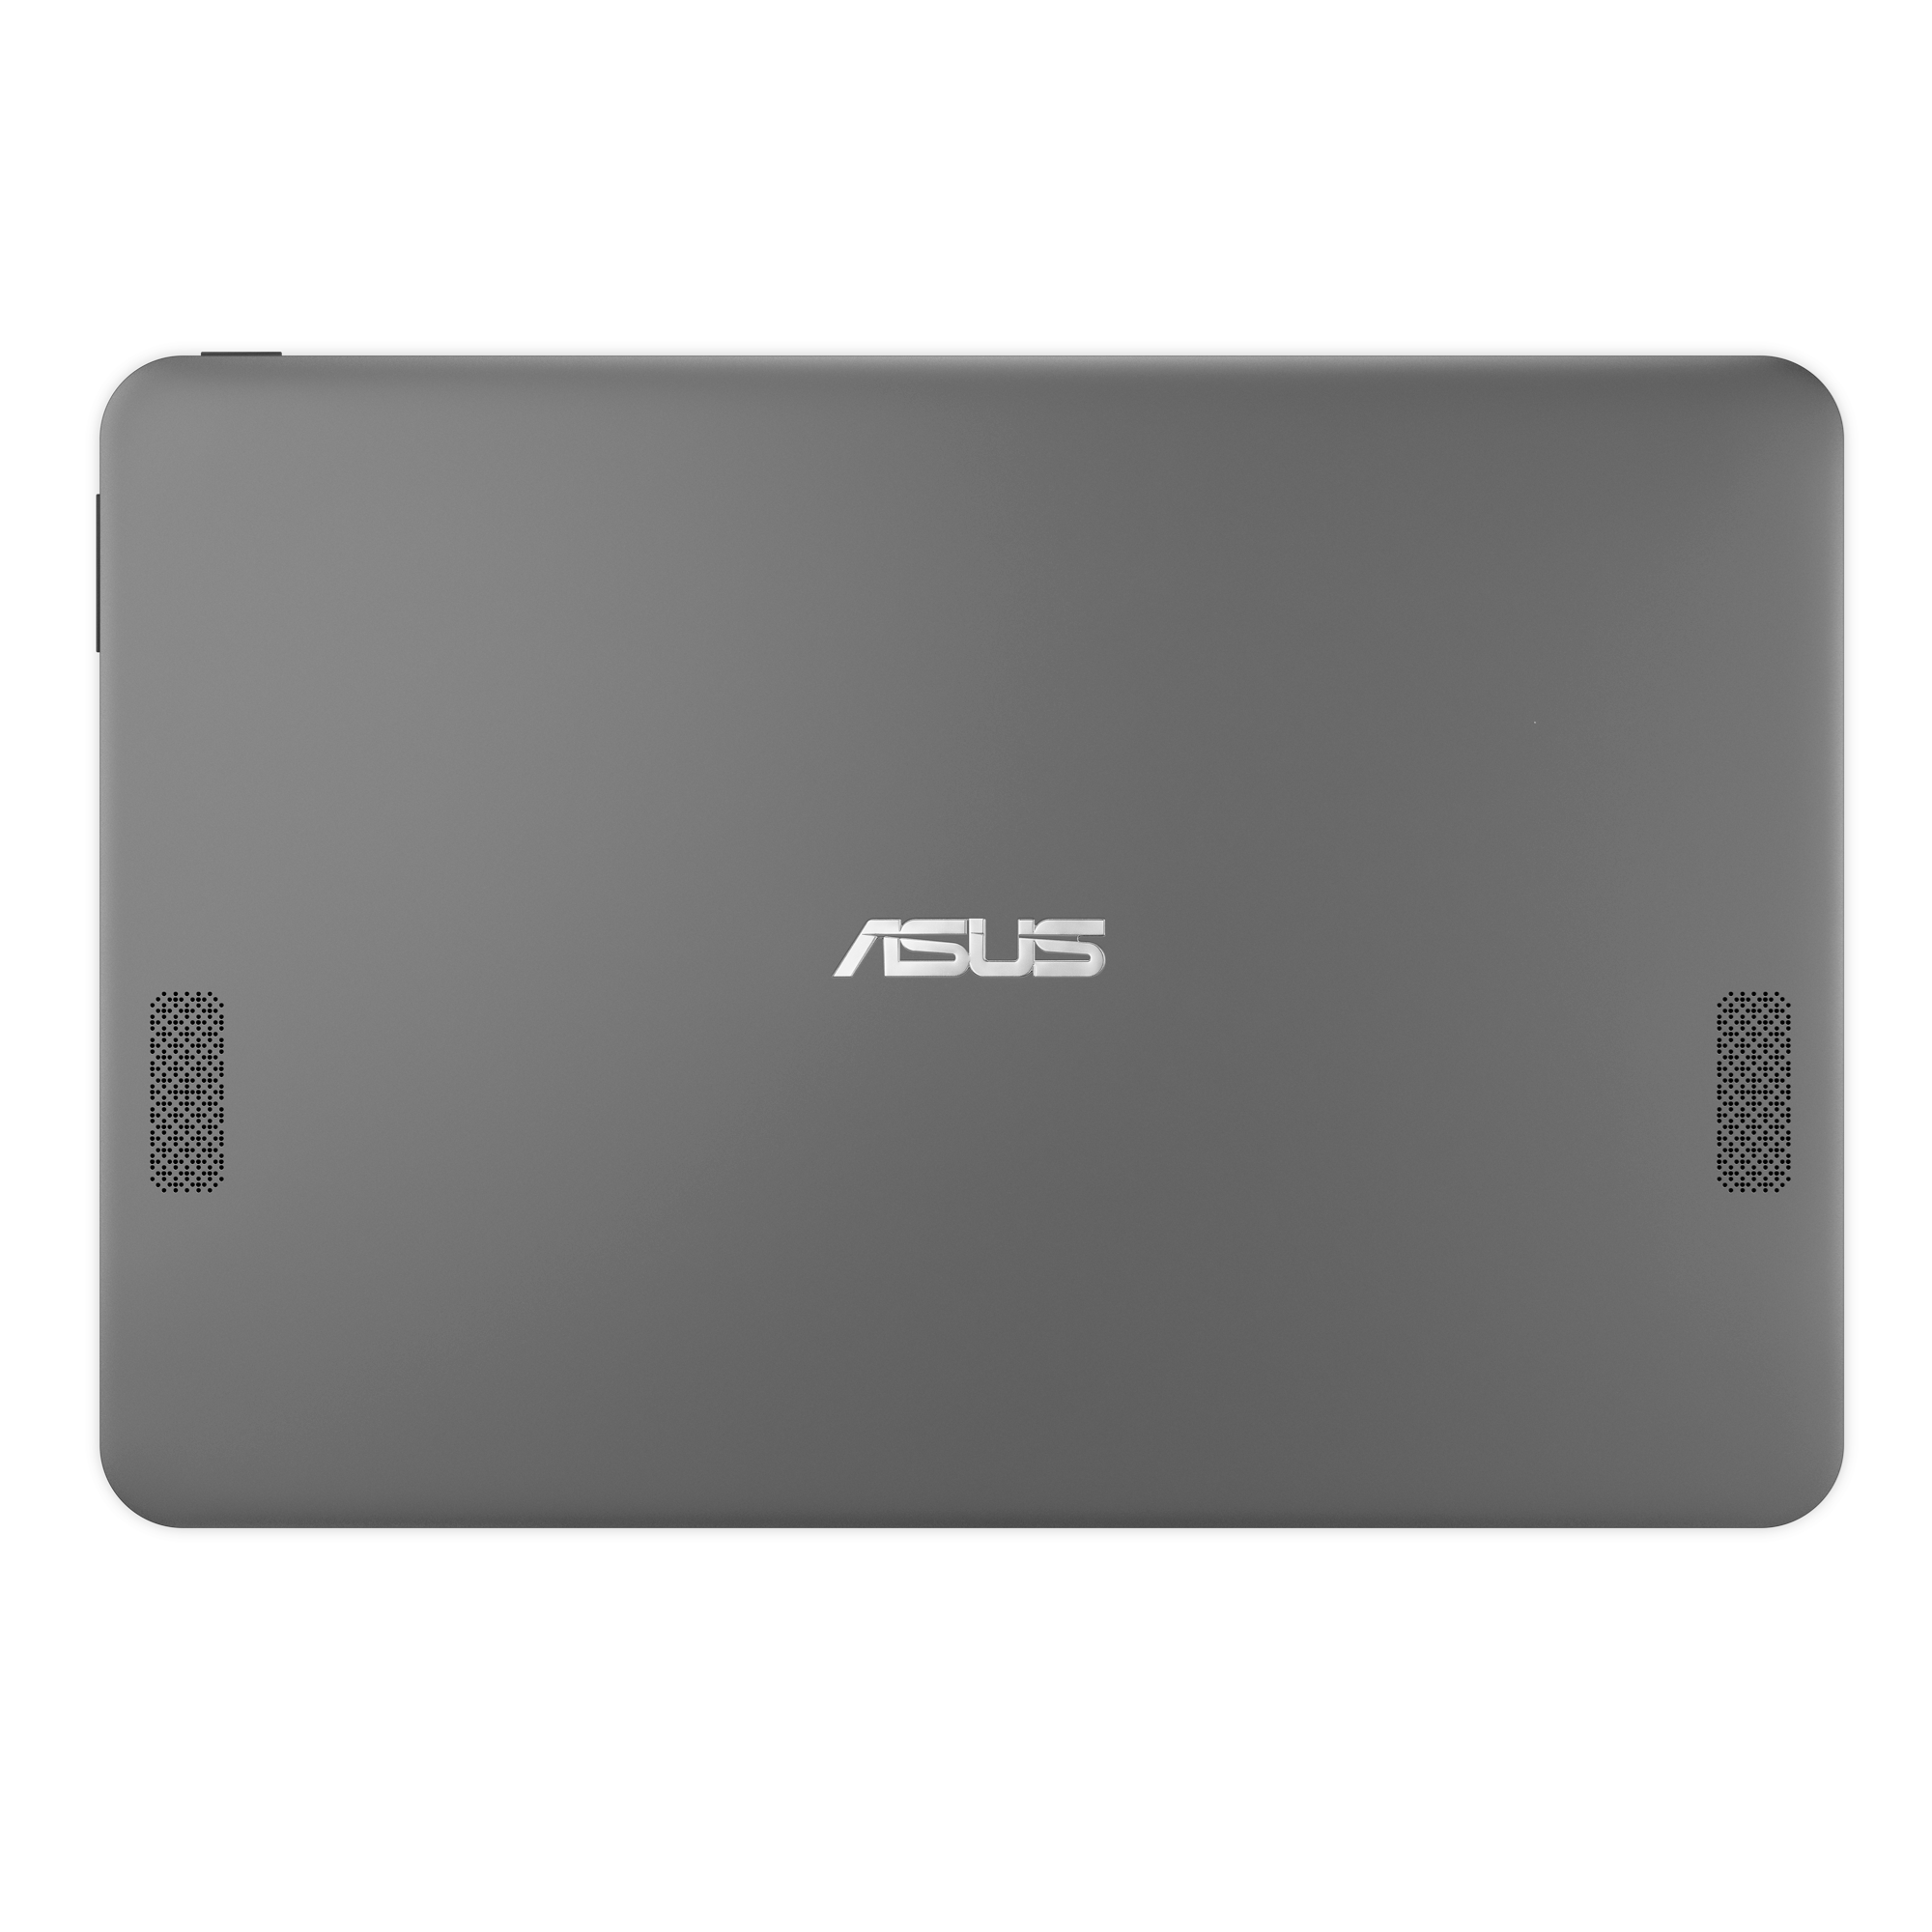 ASUS Transformer Book T101｜Laptops For Home｜ASUS USA